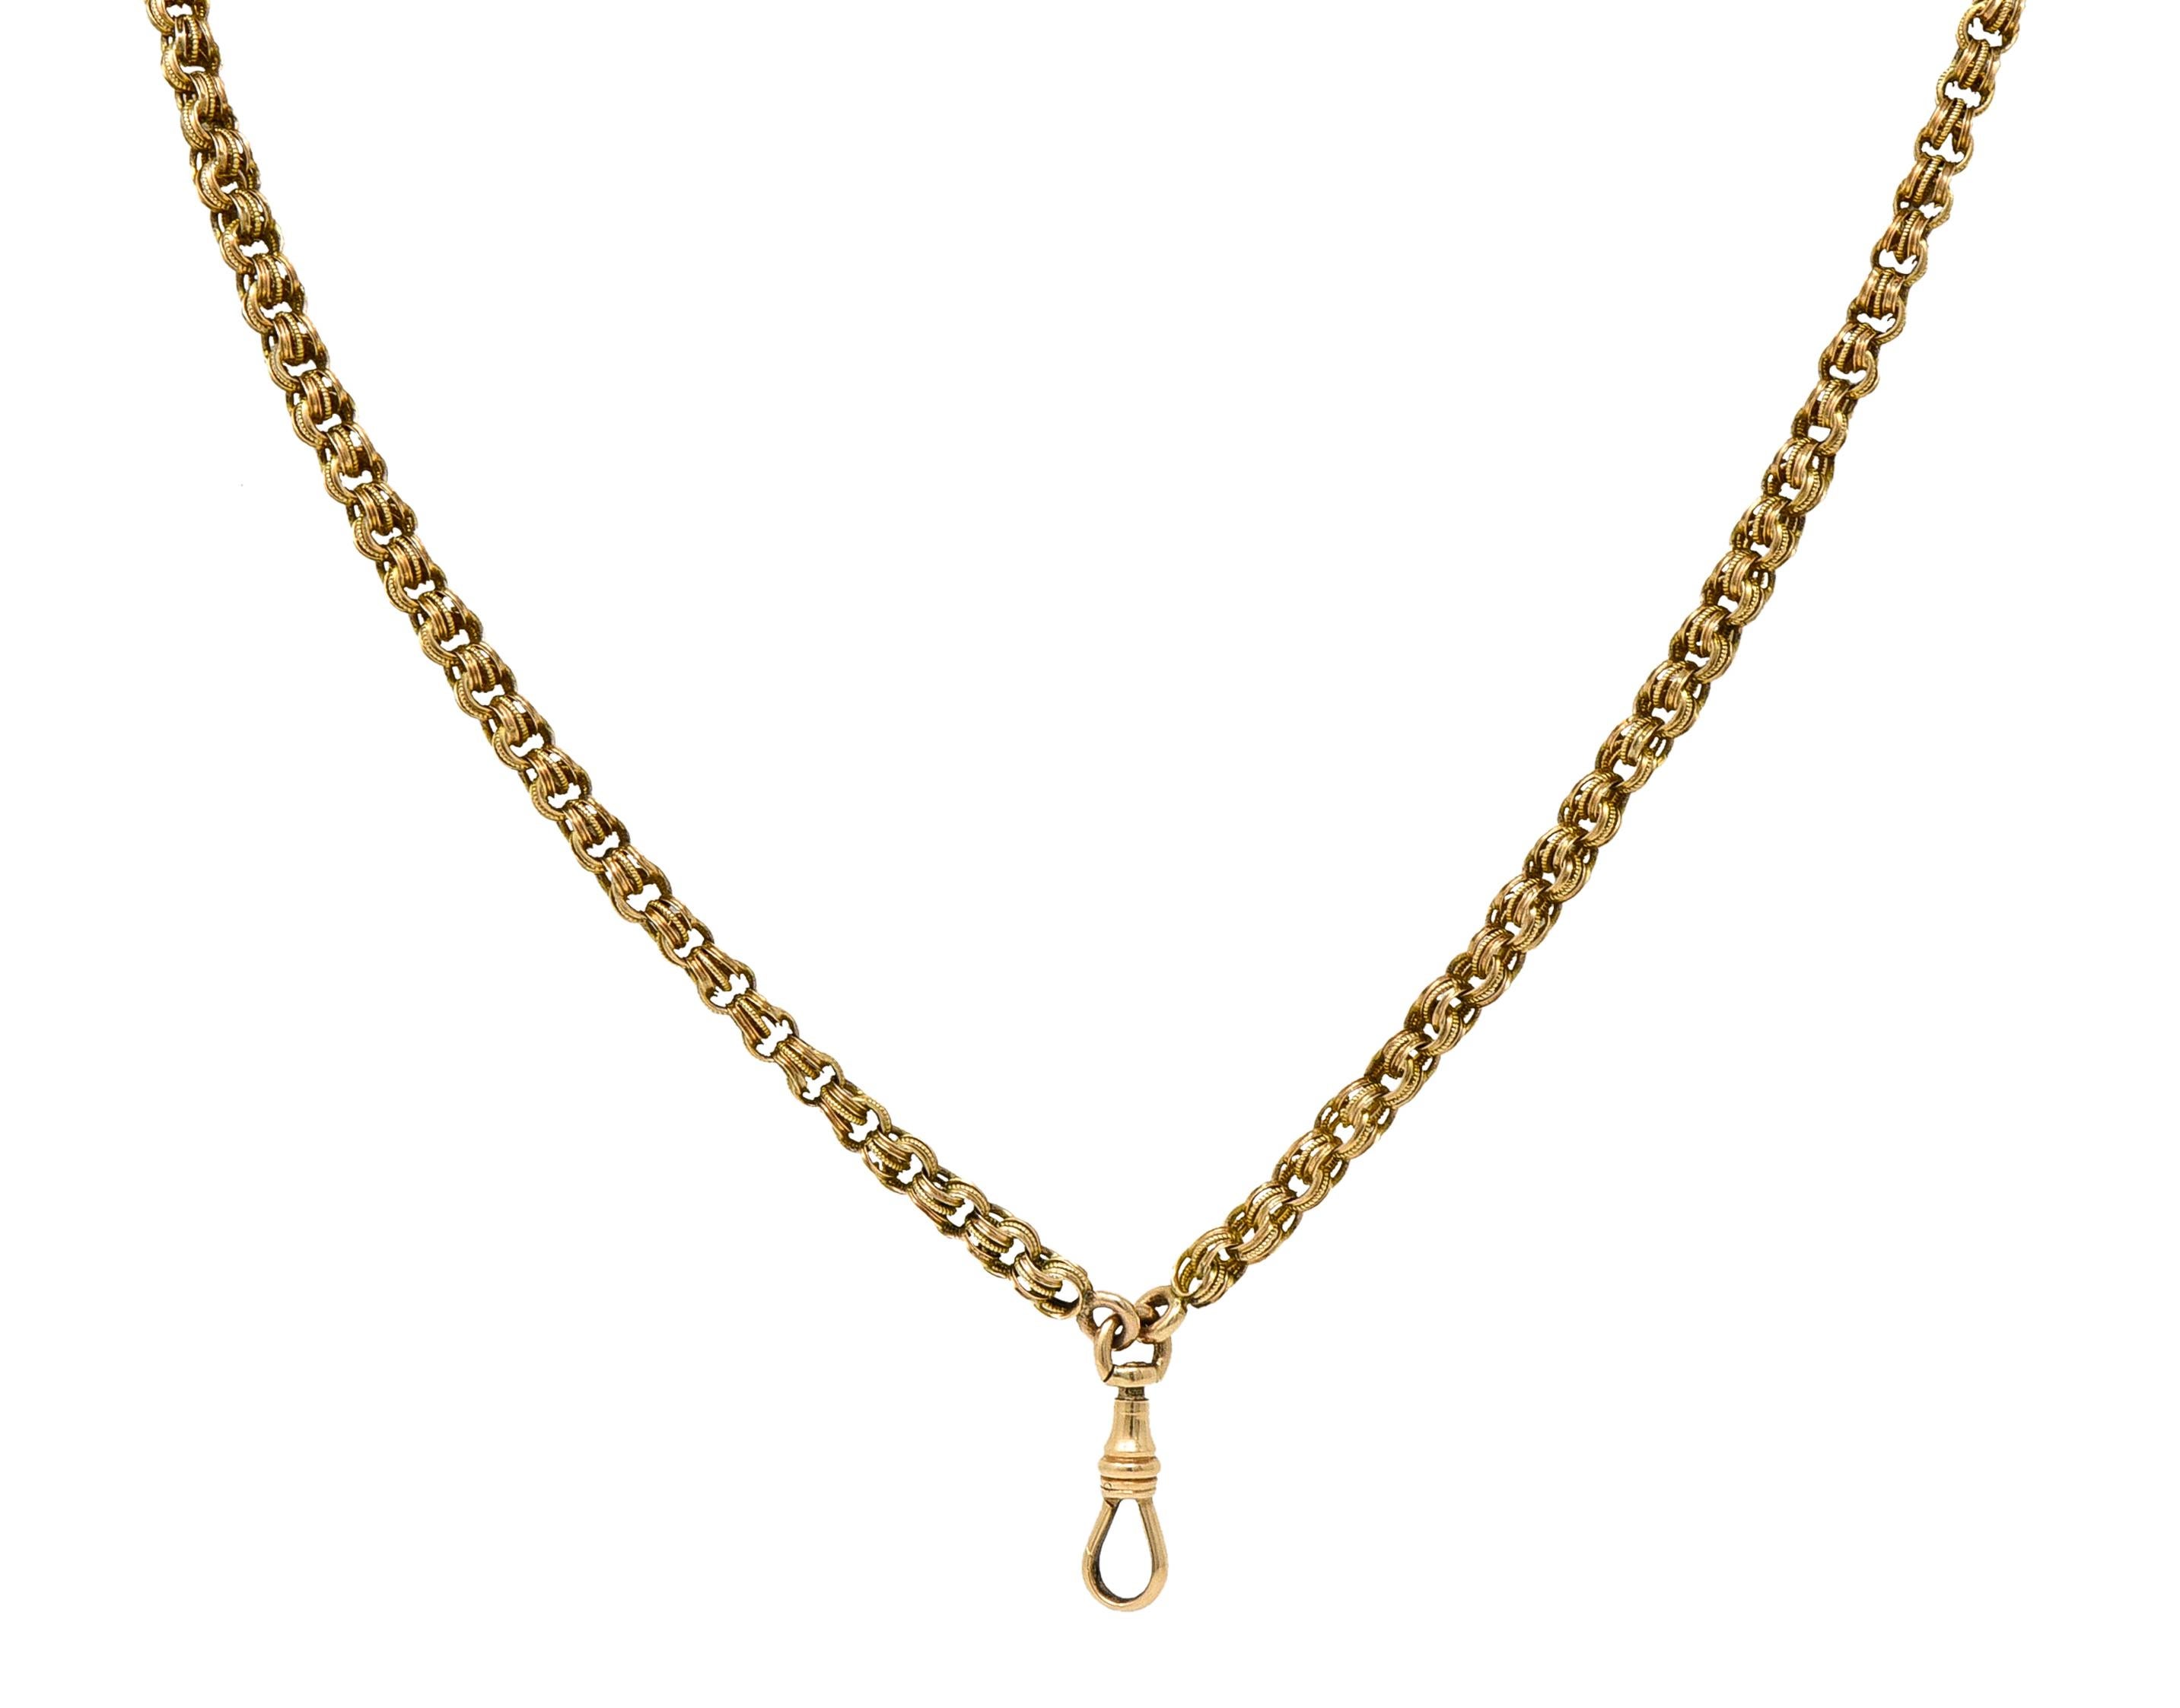 Victorian 14 Karat Yellow Gold Rollo Link Long Antique Fob Chain Necklace In Excellent Condition For Sale In Philadelphia, PA